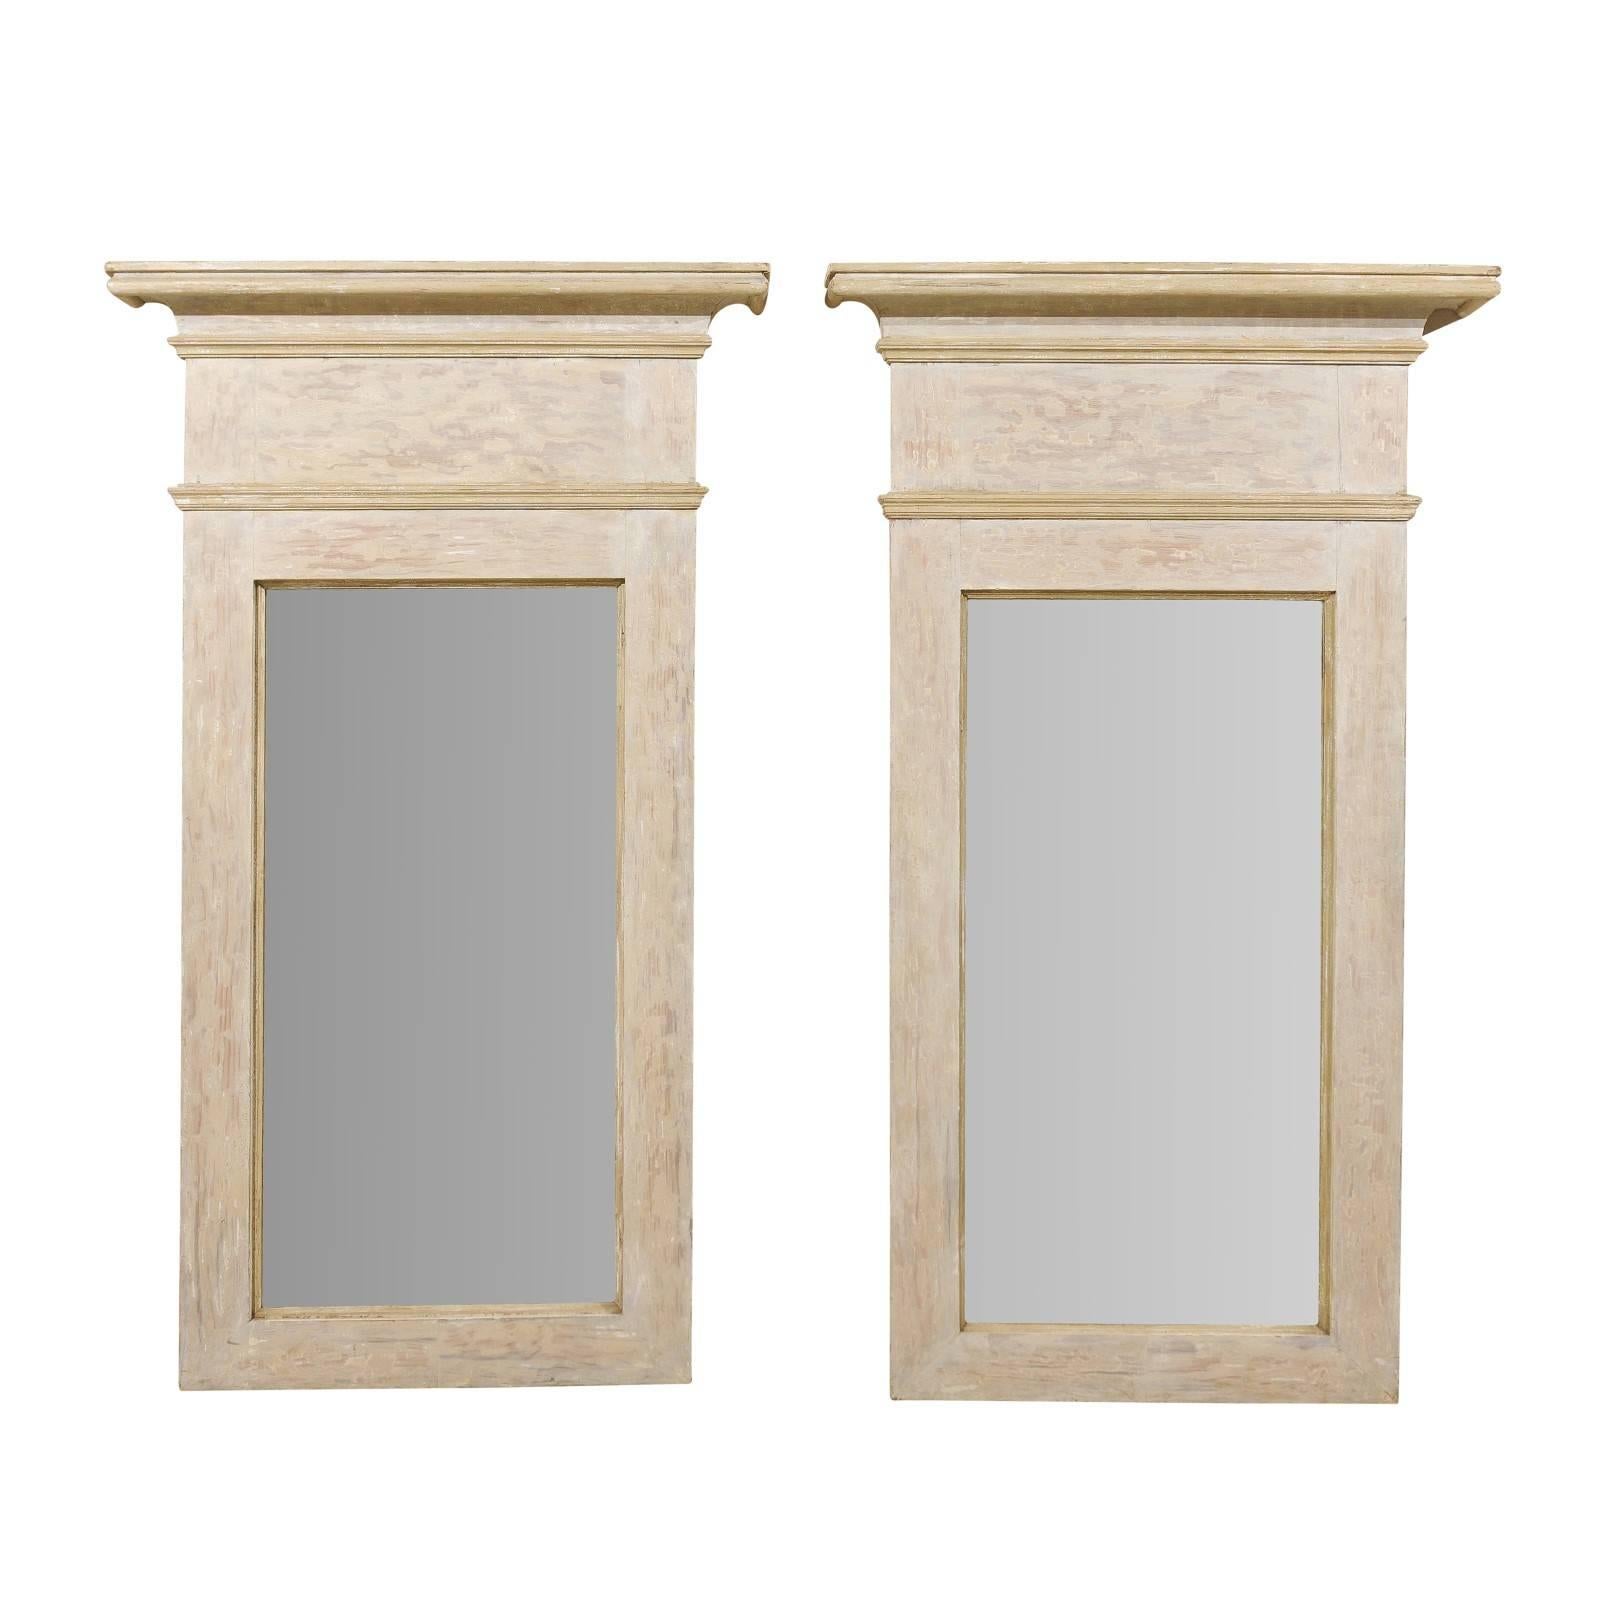 Pair of Large Size Painted Wood Trumeau Mirrors with Scraped Finish